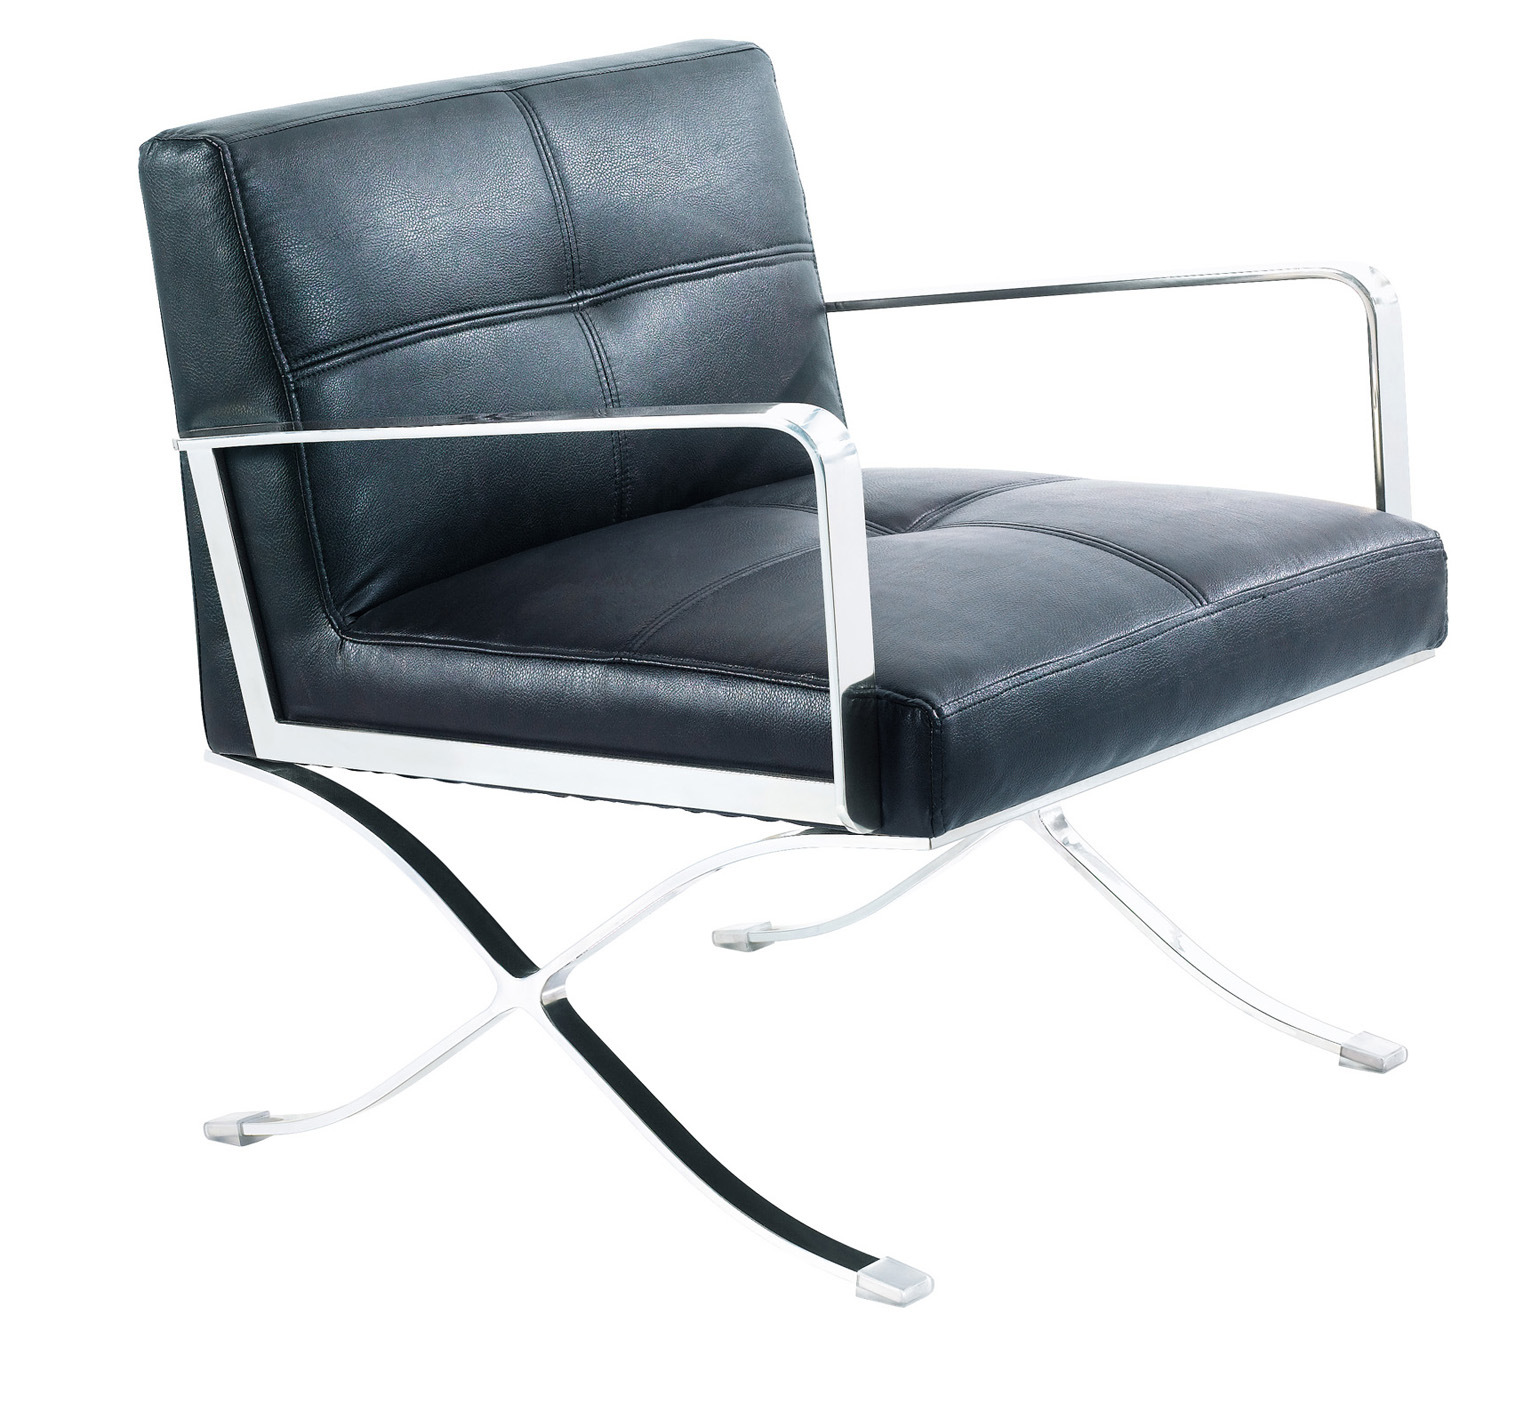 Cross Frame Stainless Steel Hotel Leisure Chair